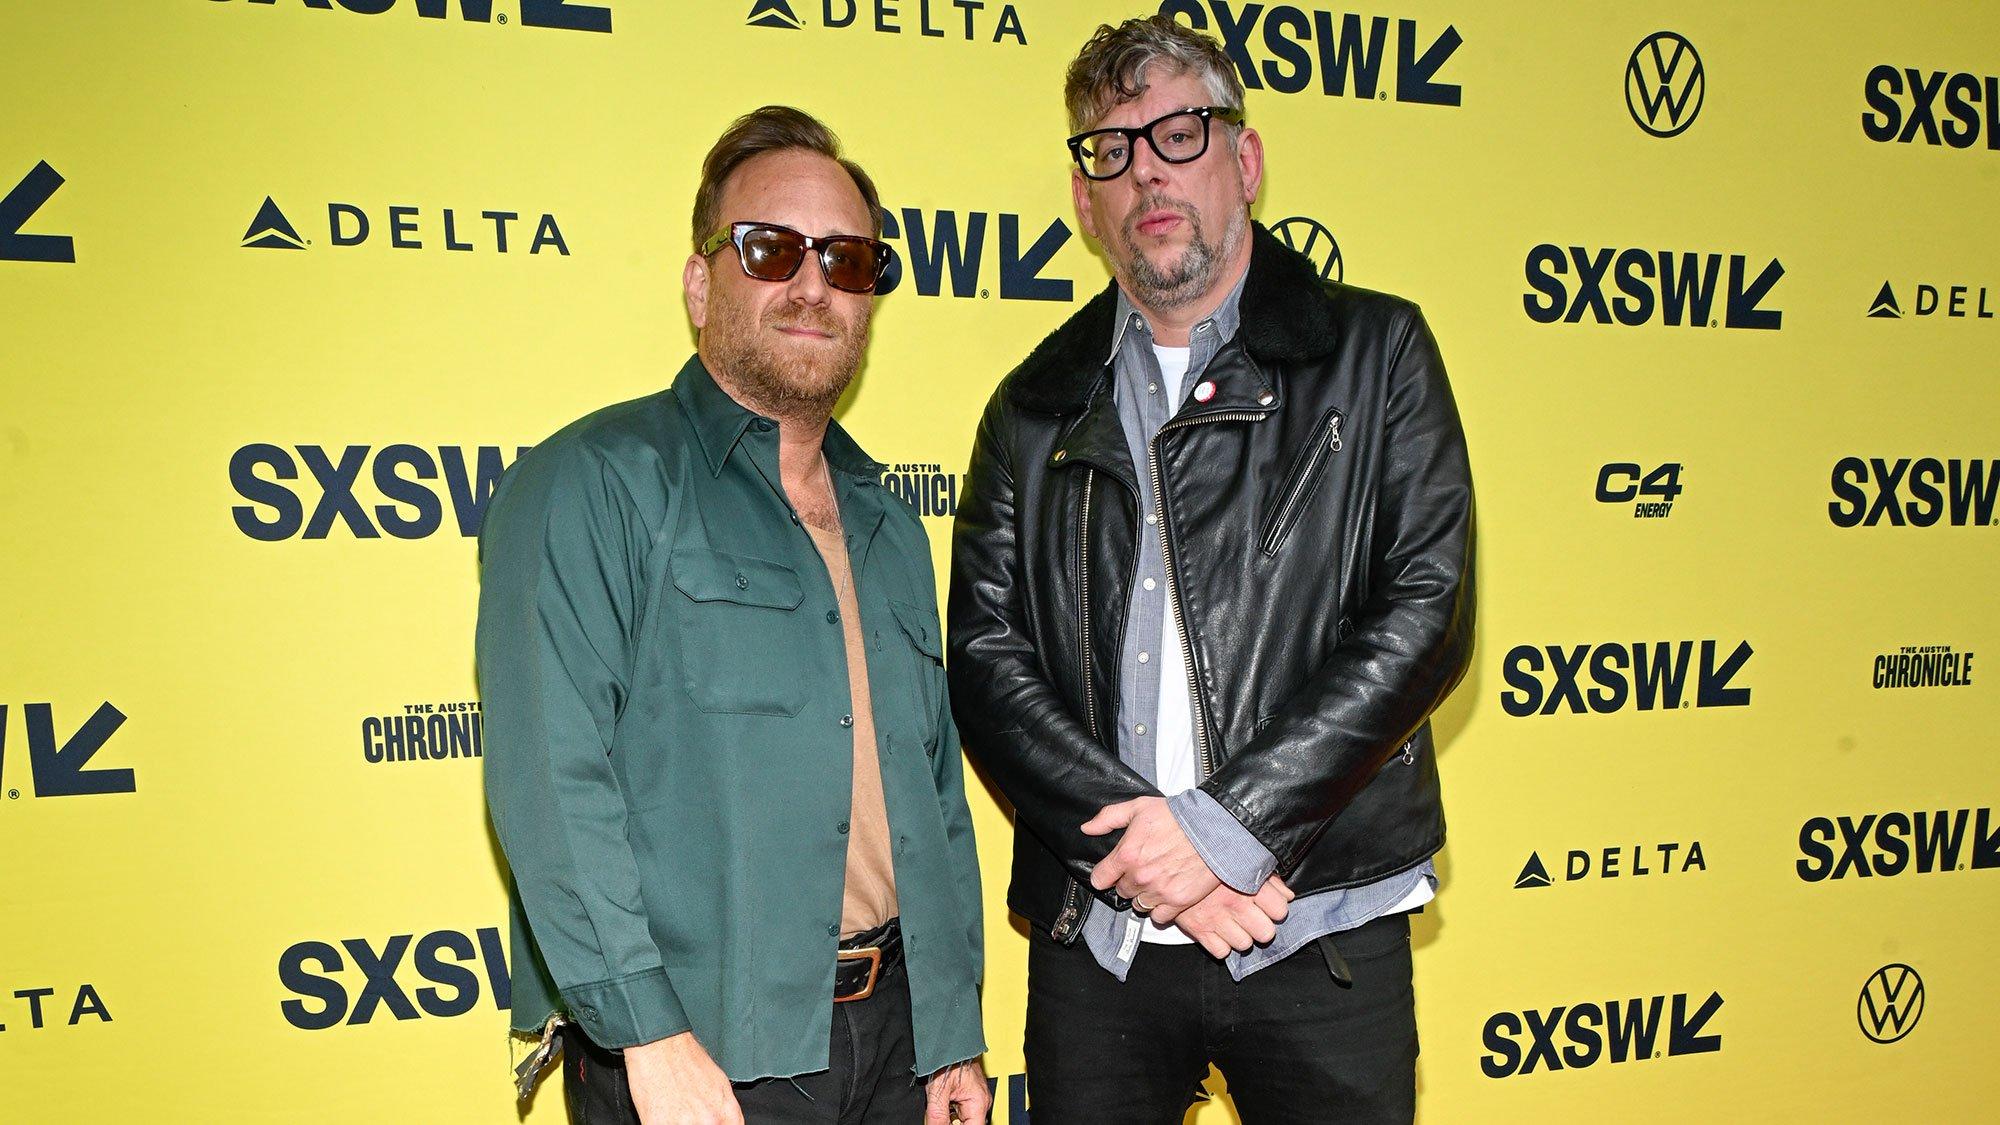 (L-R) Dan Auerbach and Patrick Carney attend the 'This is a Film About The Black Keys' world premiere as part of SXSW 2024 Conference and Festivals held at The Paramount Theatre on March 11, 2024 in Austin, Texas.